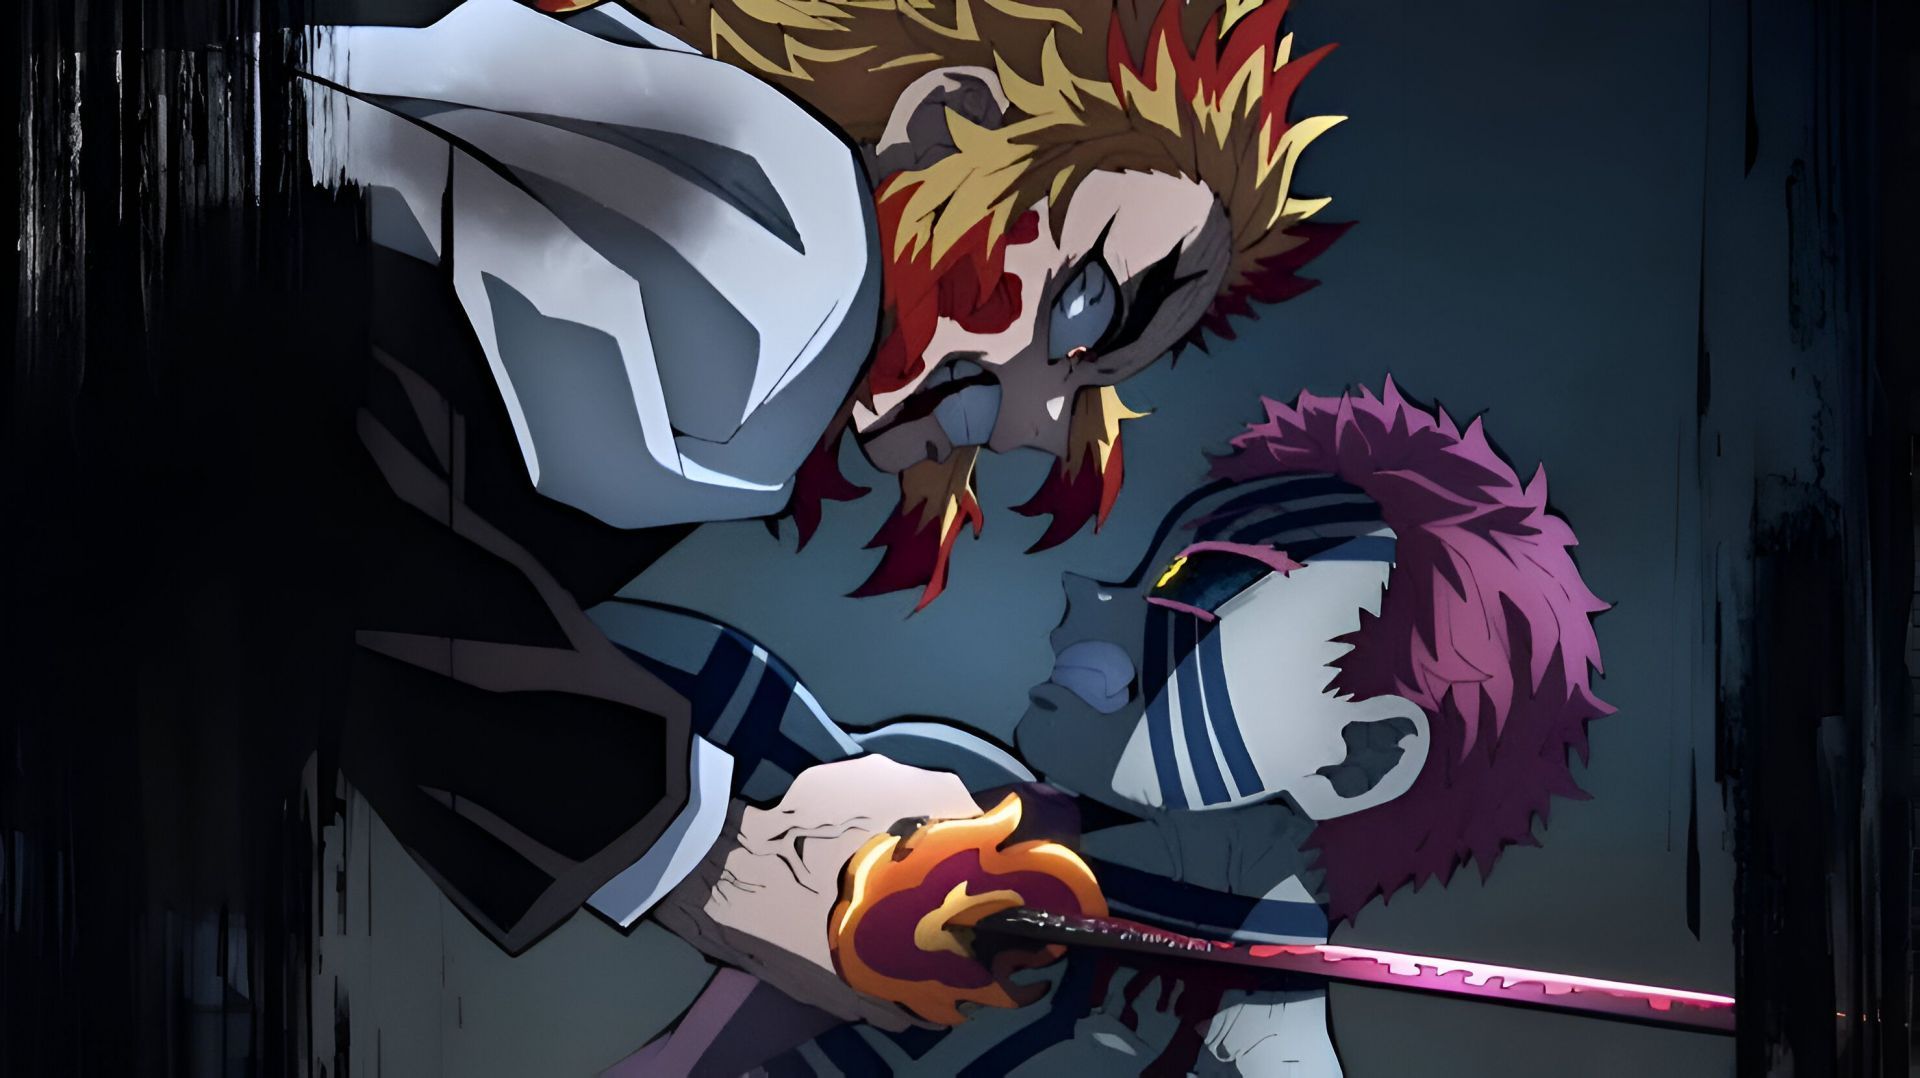 Rengoku (left) and Akaza (right) as seen in the anime (Image via Ufotable)